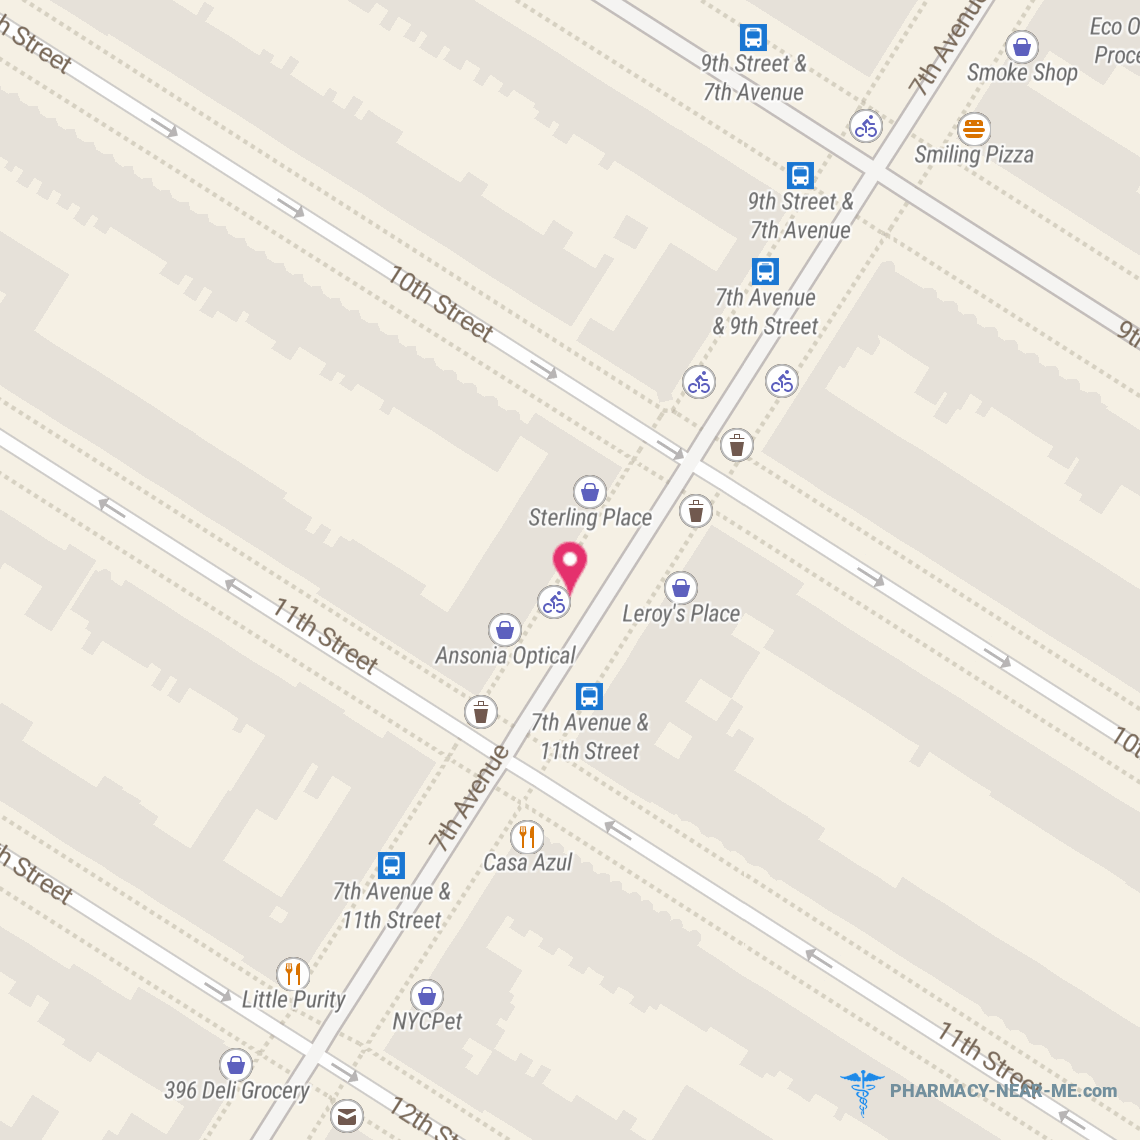 ANSONIA CHEMIST - Pharmacy Hours, Phone, Reviews & Information: 358 7th Avenue, Brooklyn, New York 11215, United States